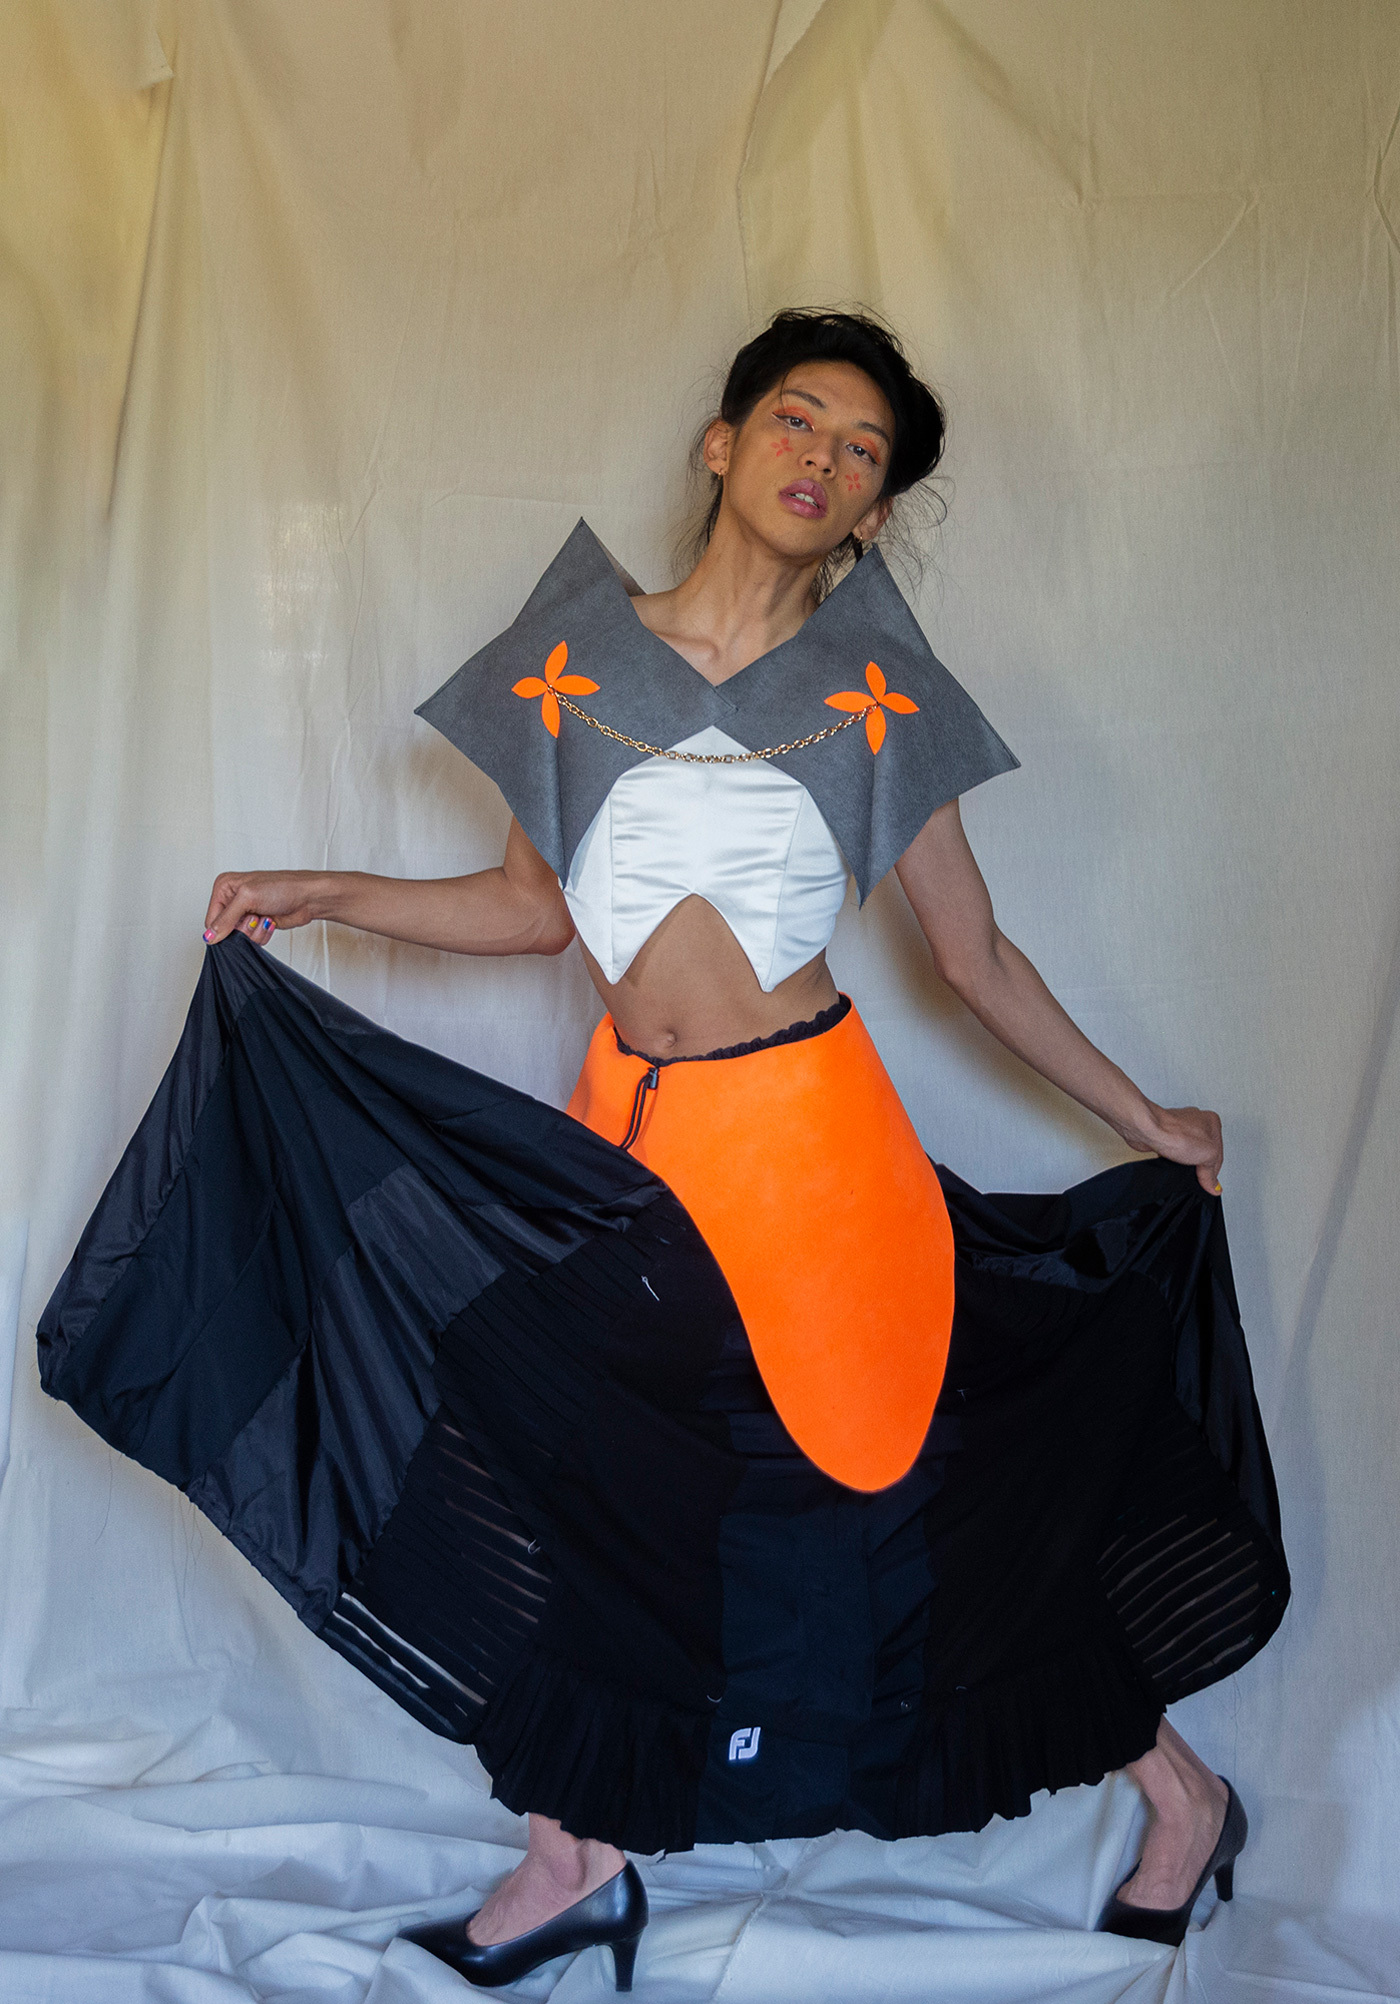 A model poses with a dress. They are holding up two sides of the dress revealing heels. A bright orange piece sits on top of the black dress.